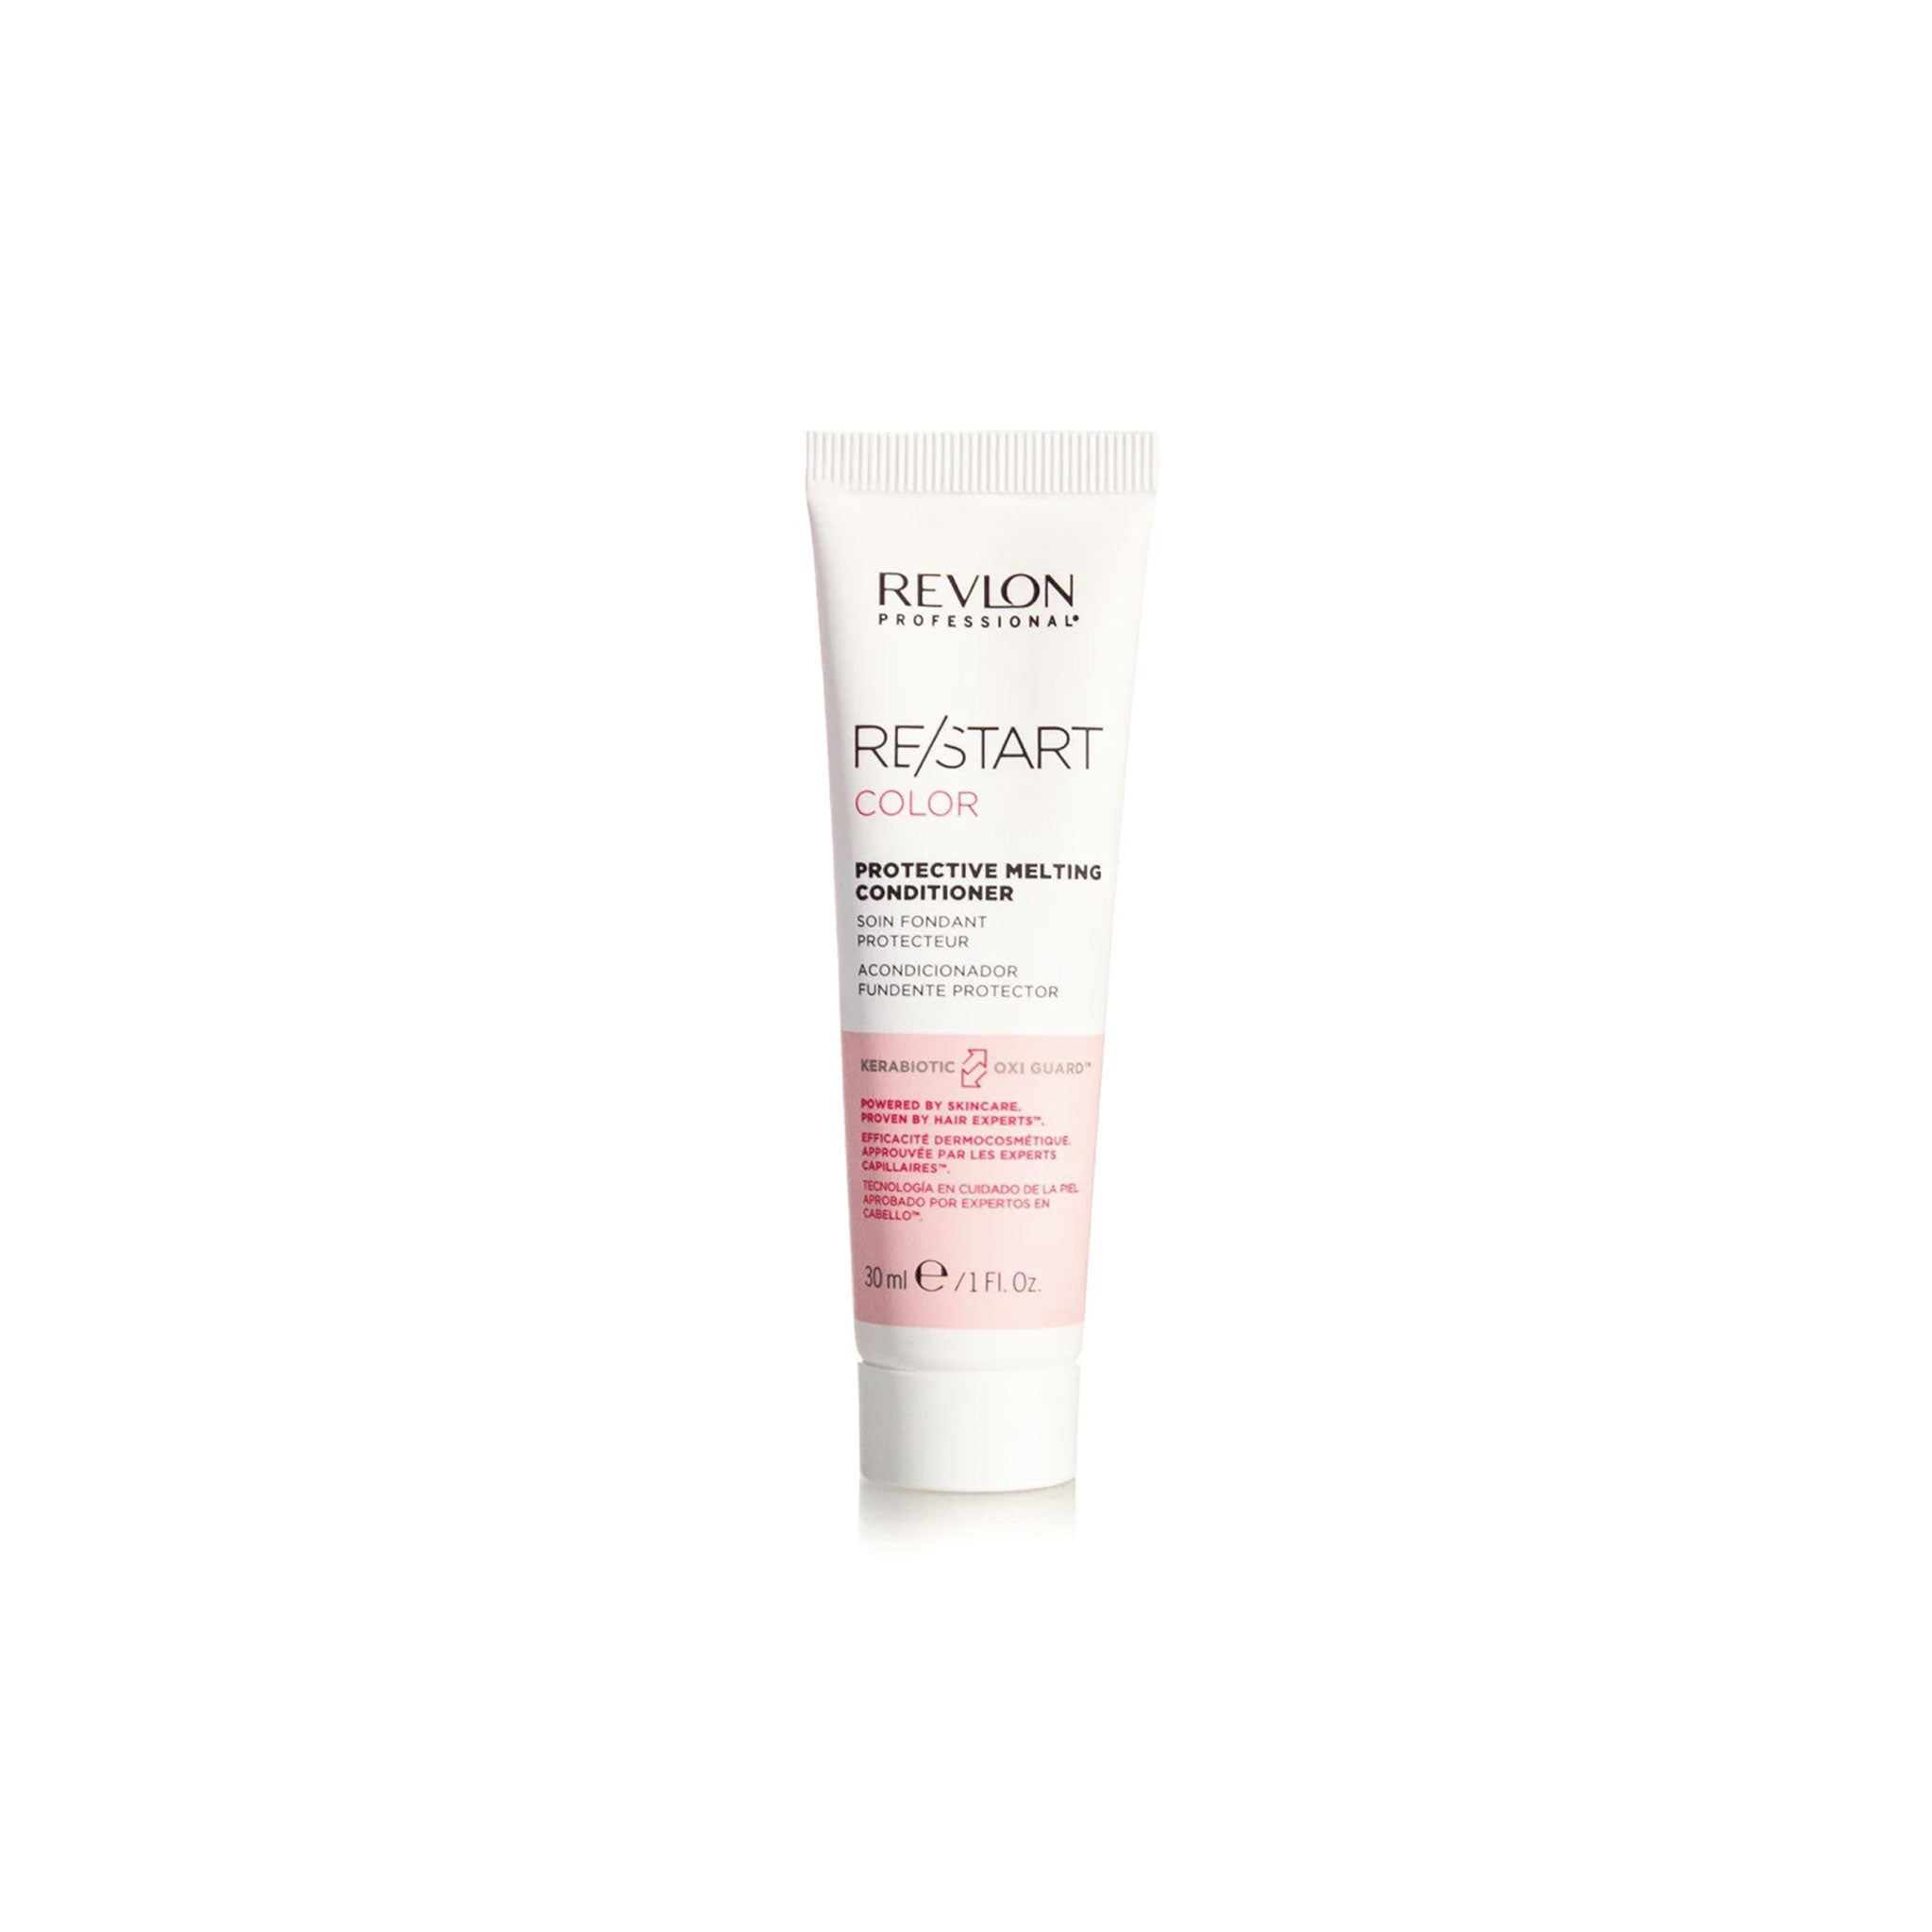 Re/start™ Color Protective Melting Conditioner - Travel Size